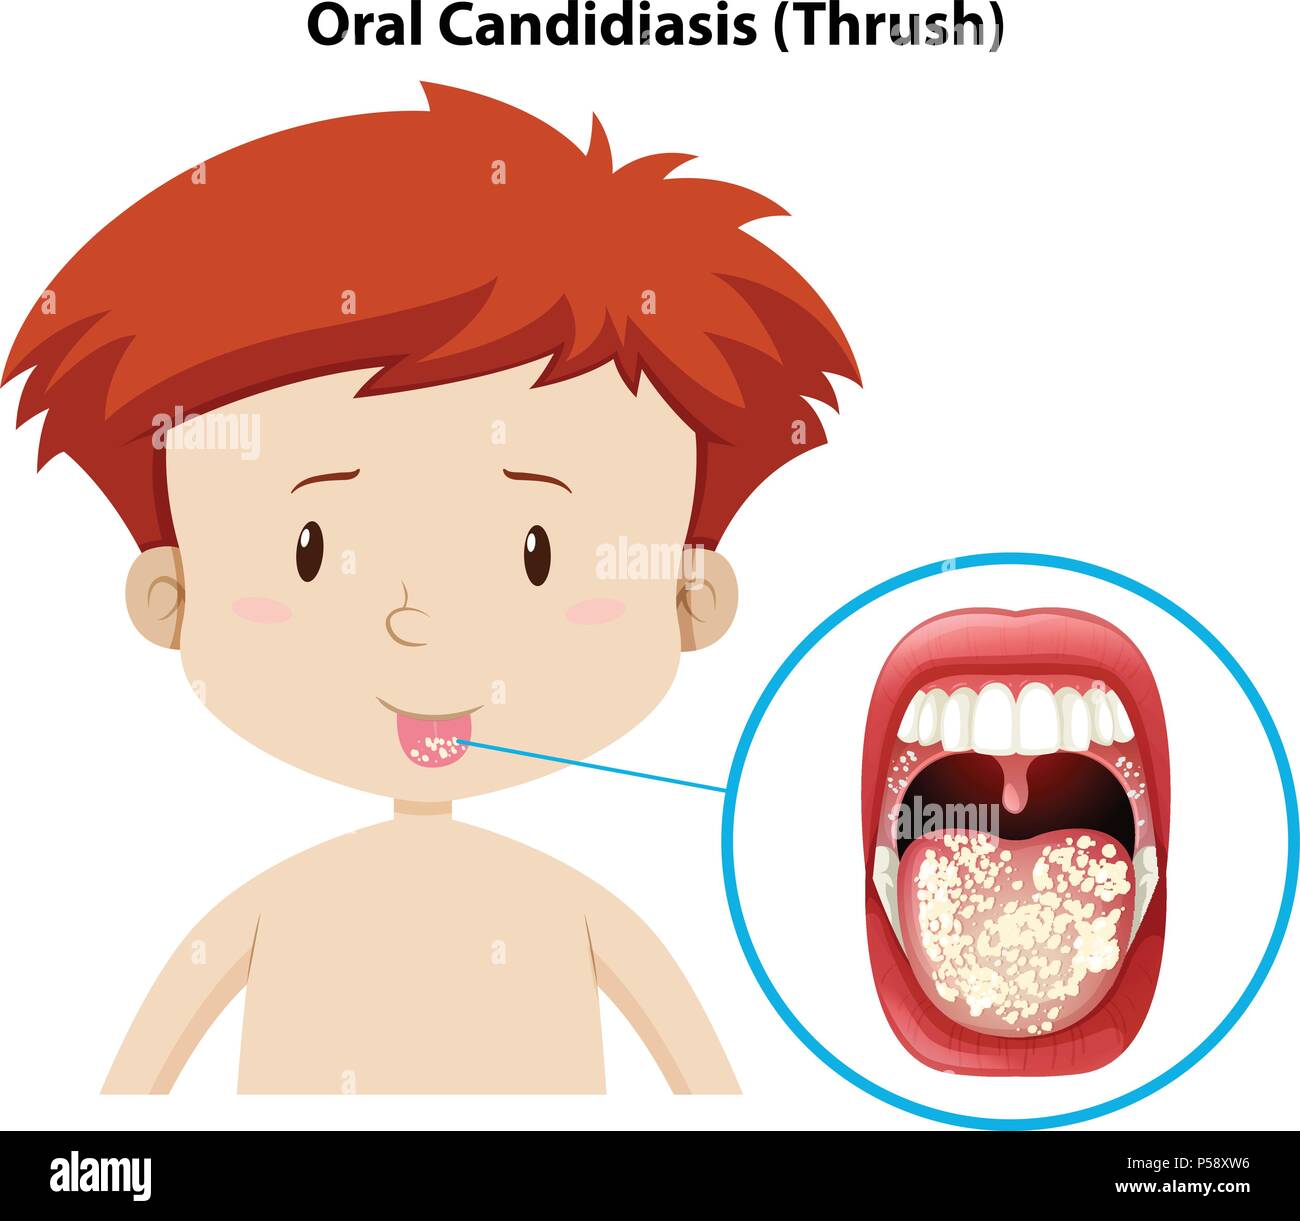 A Young Boy with Oral Candidiasis illustration Stock Vector